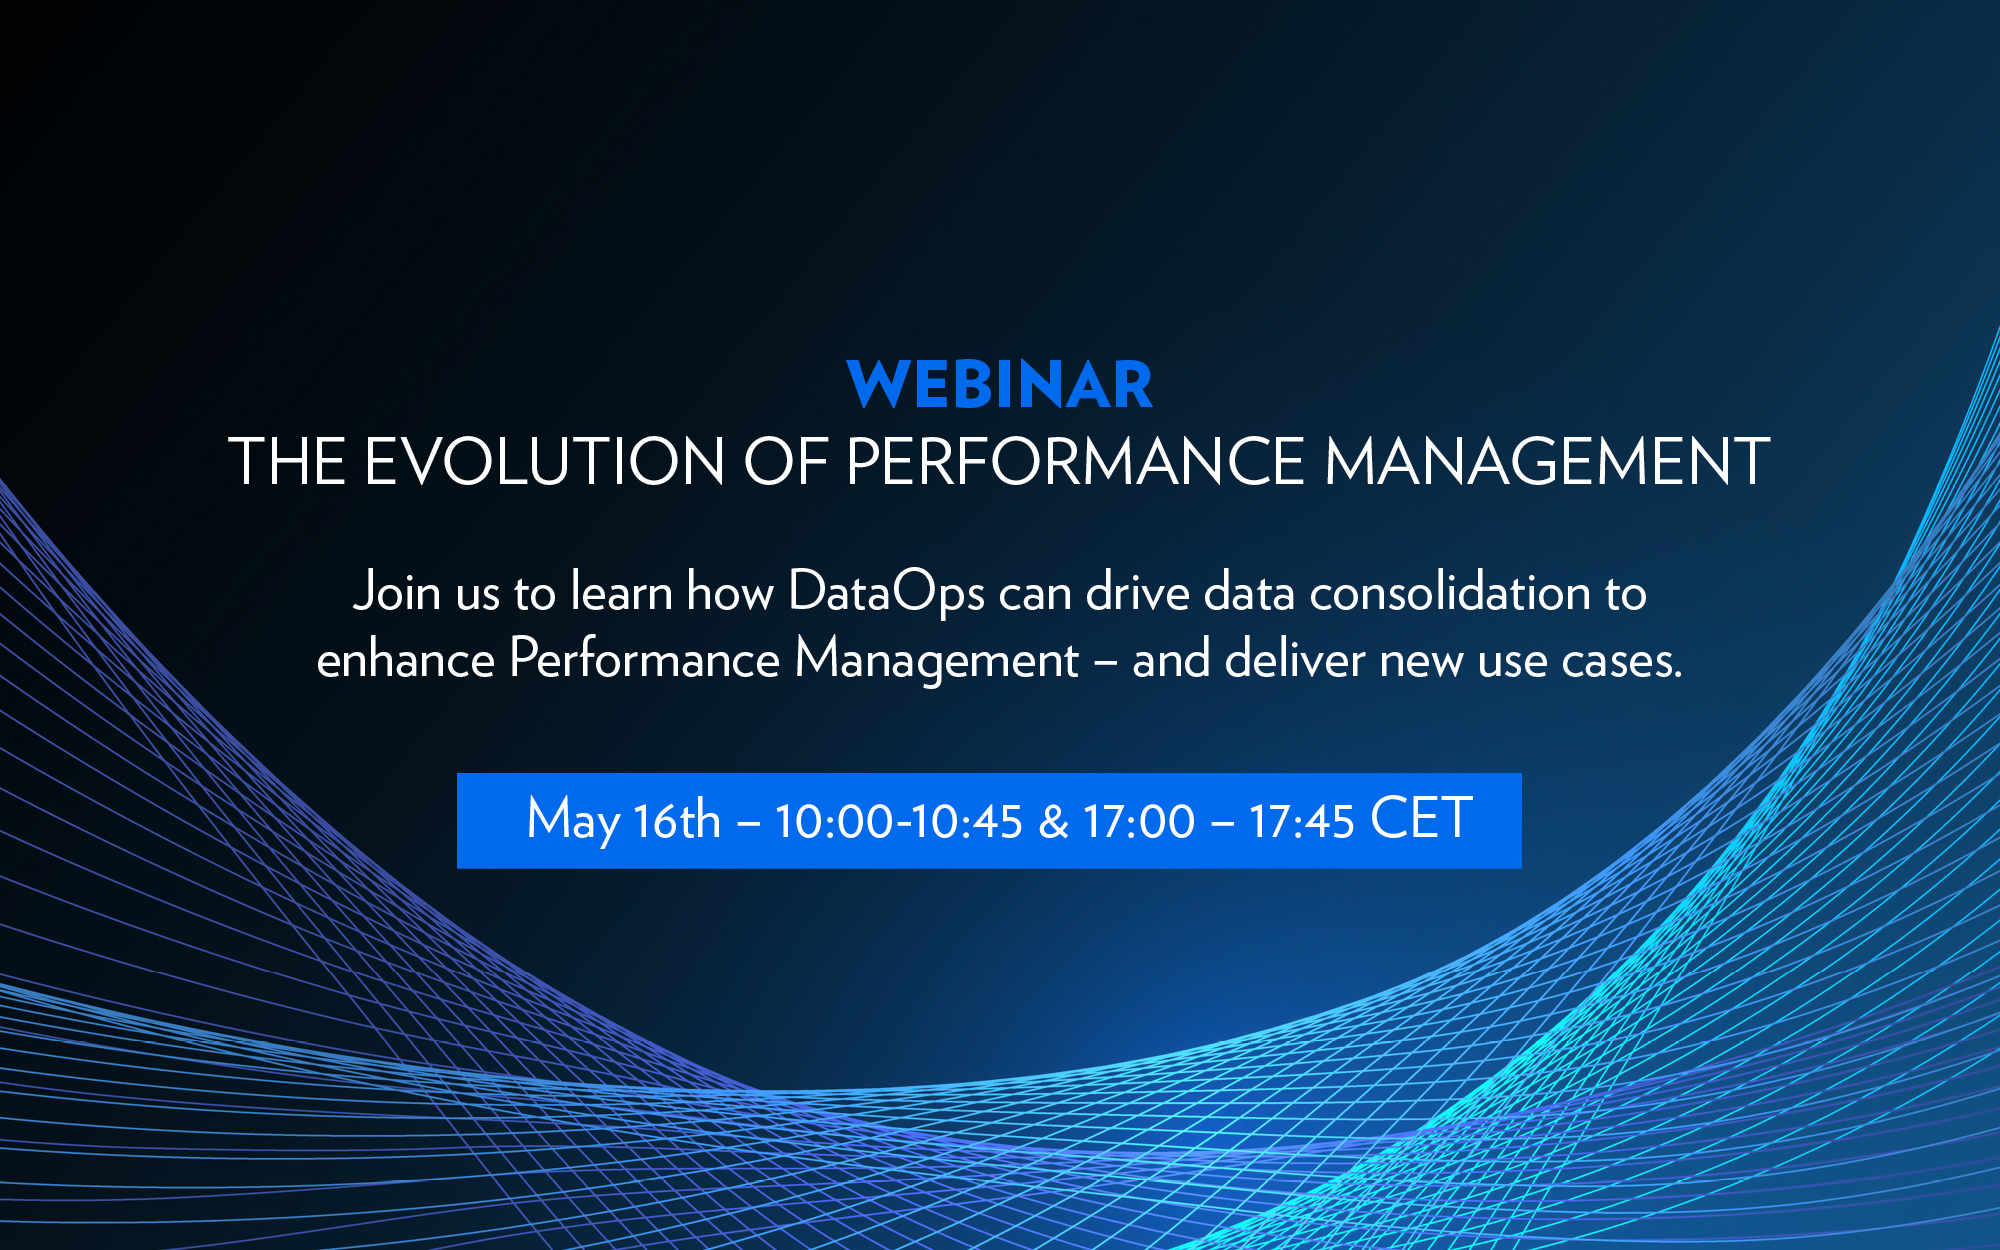 The evolution of Performance Management – using DataOps to integrate new sources of data